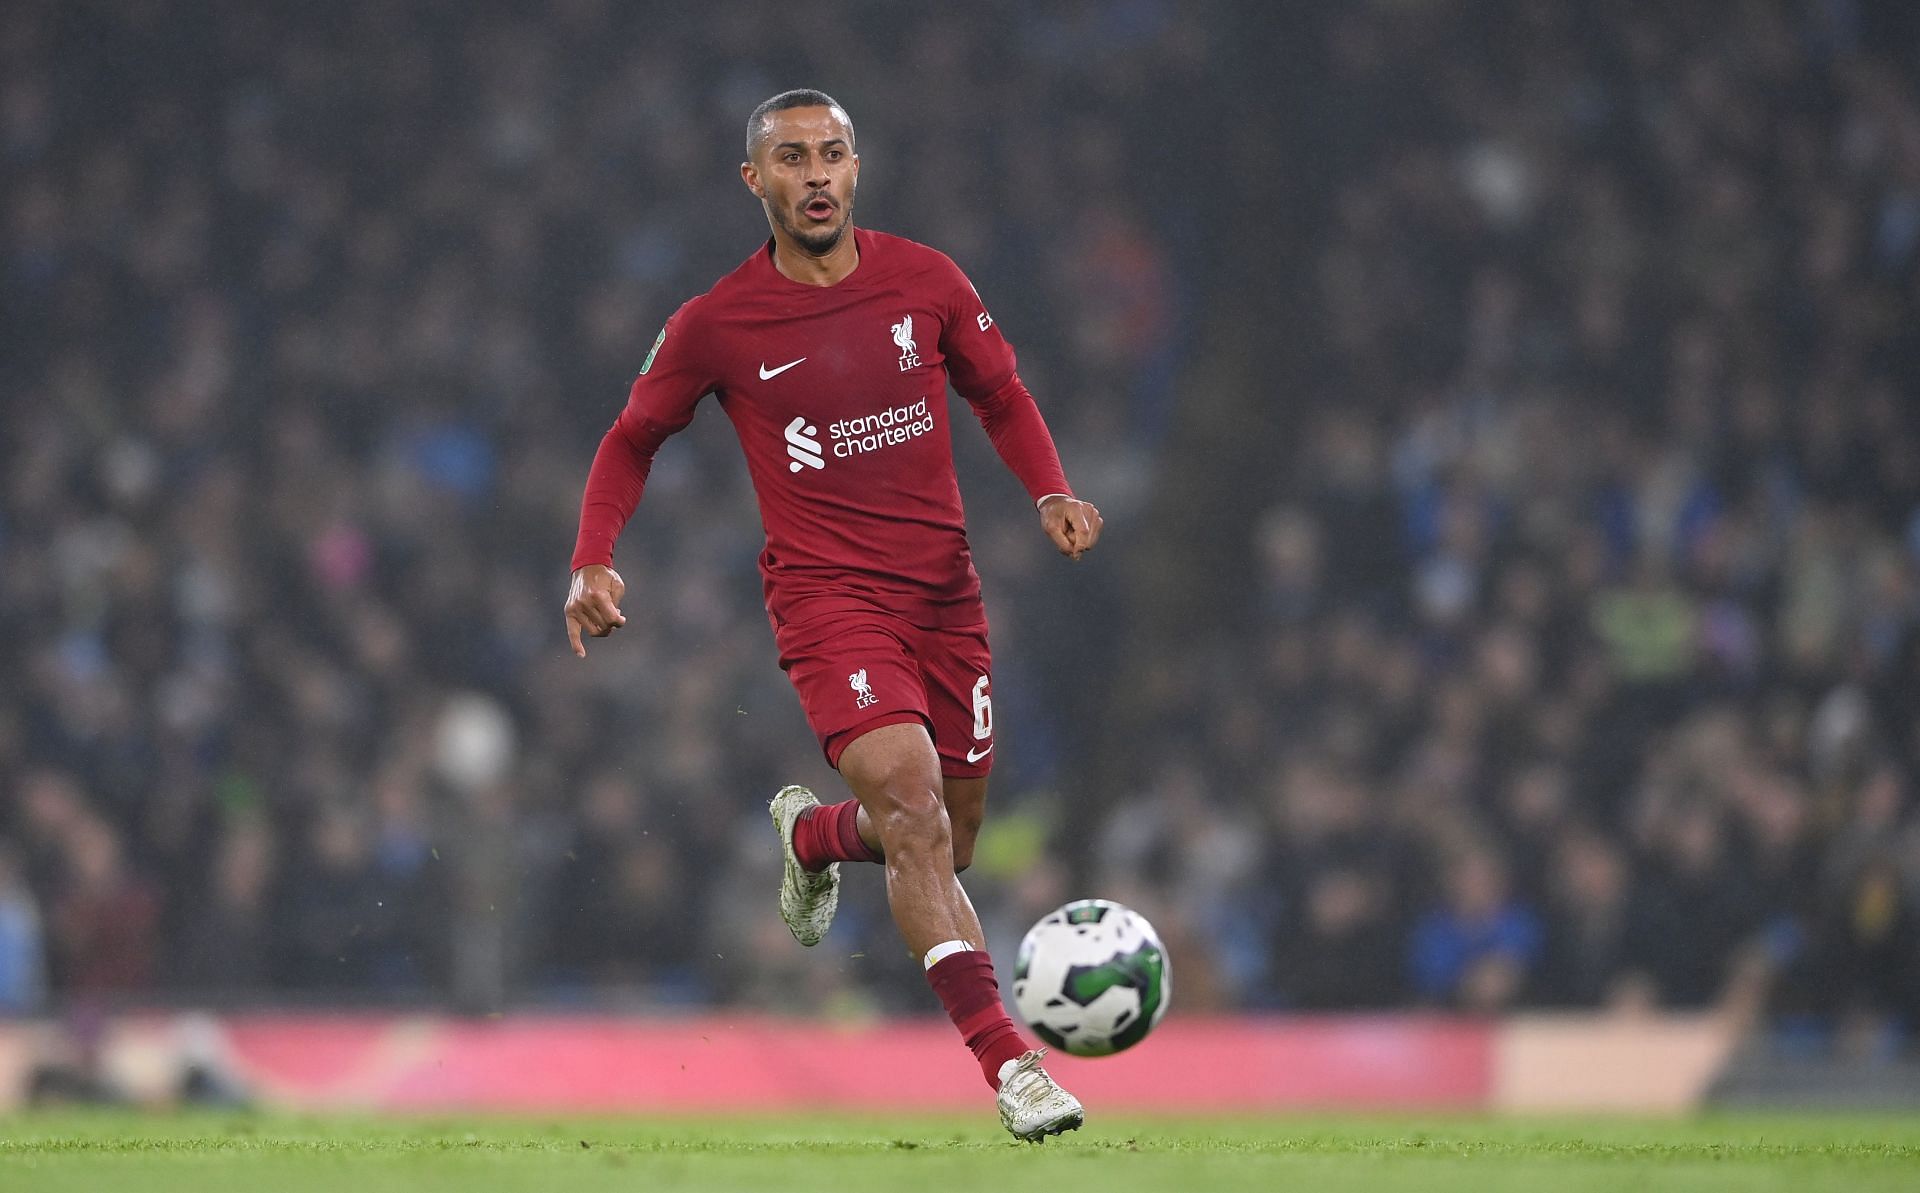 Ex-Liverpool midfielder Thiago Alcantara wanted by European giants as part of coaching staff just hours after announcing retirement: Reports